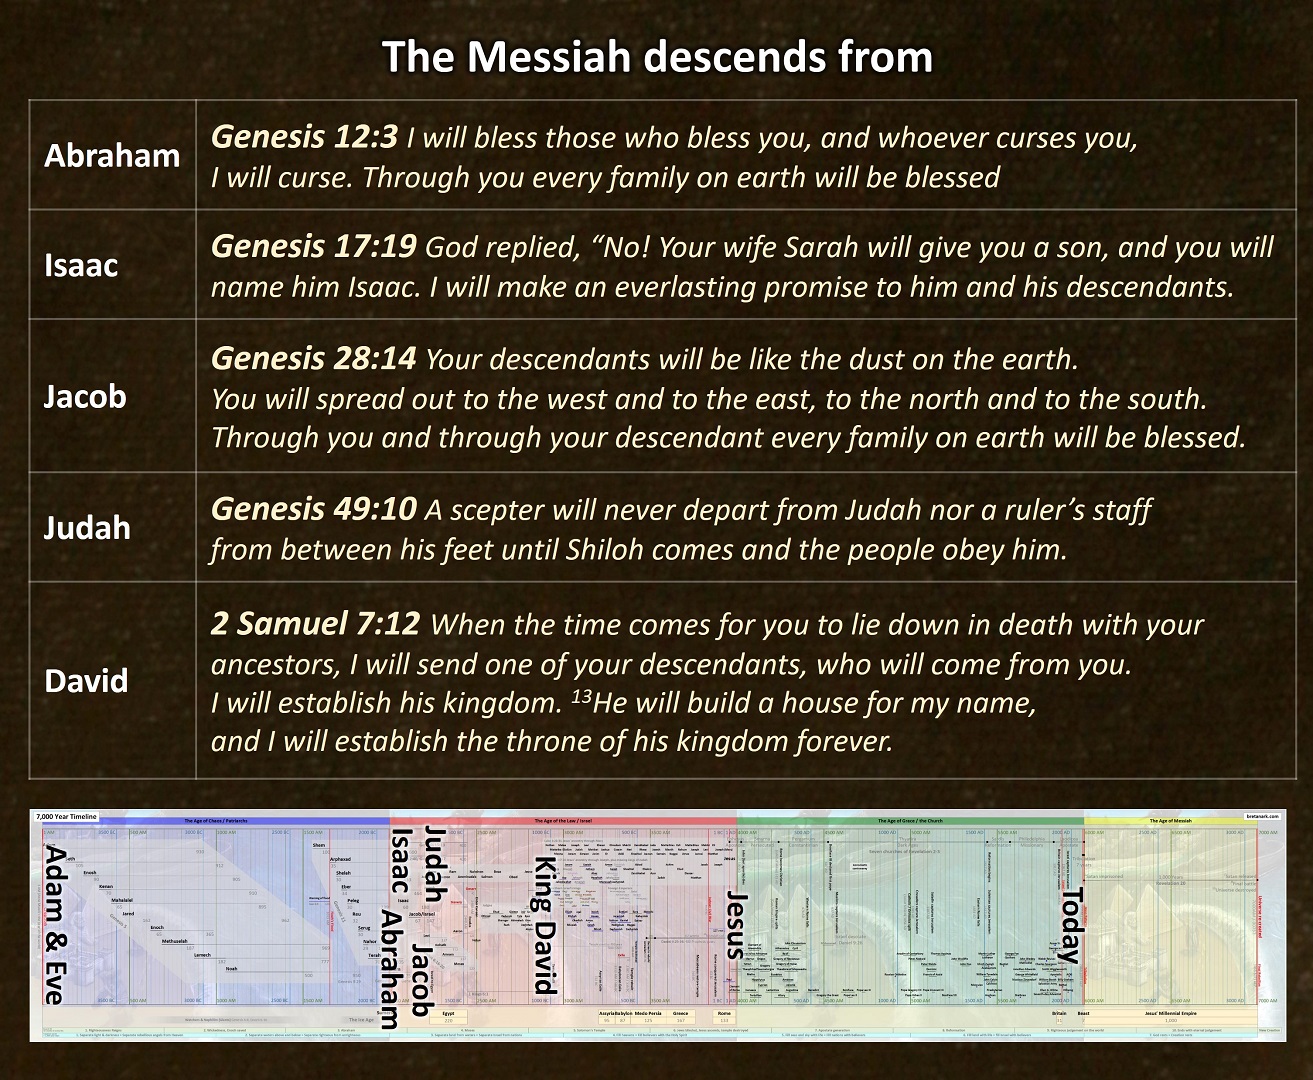 Table of Messianic ancestry